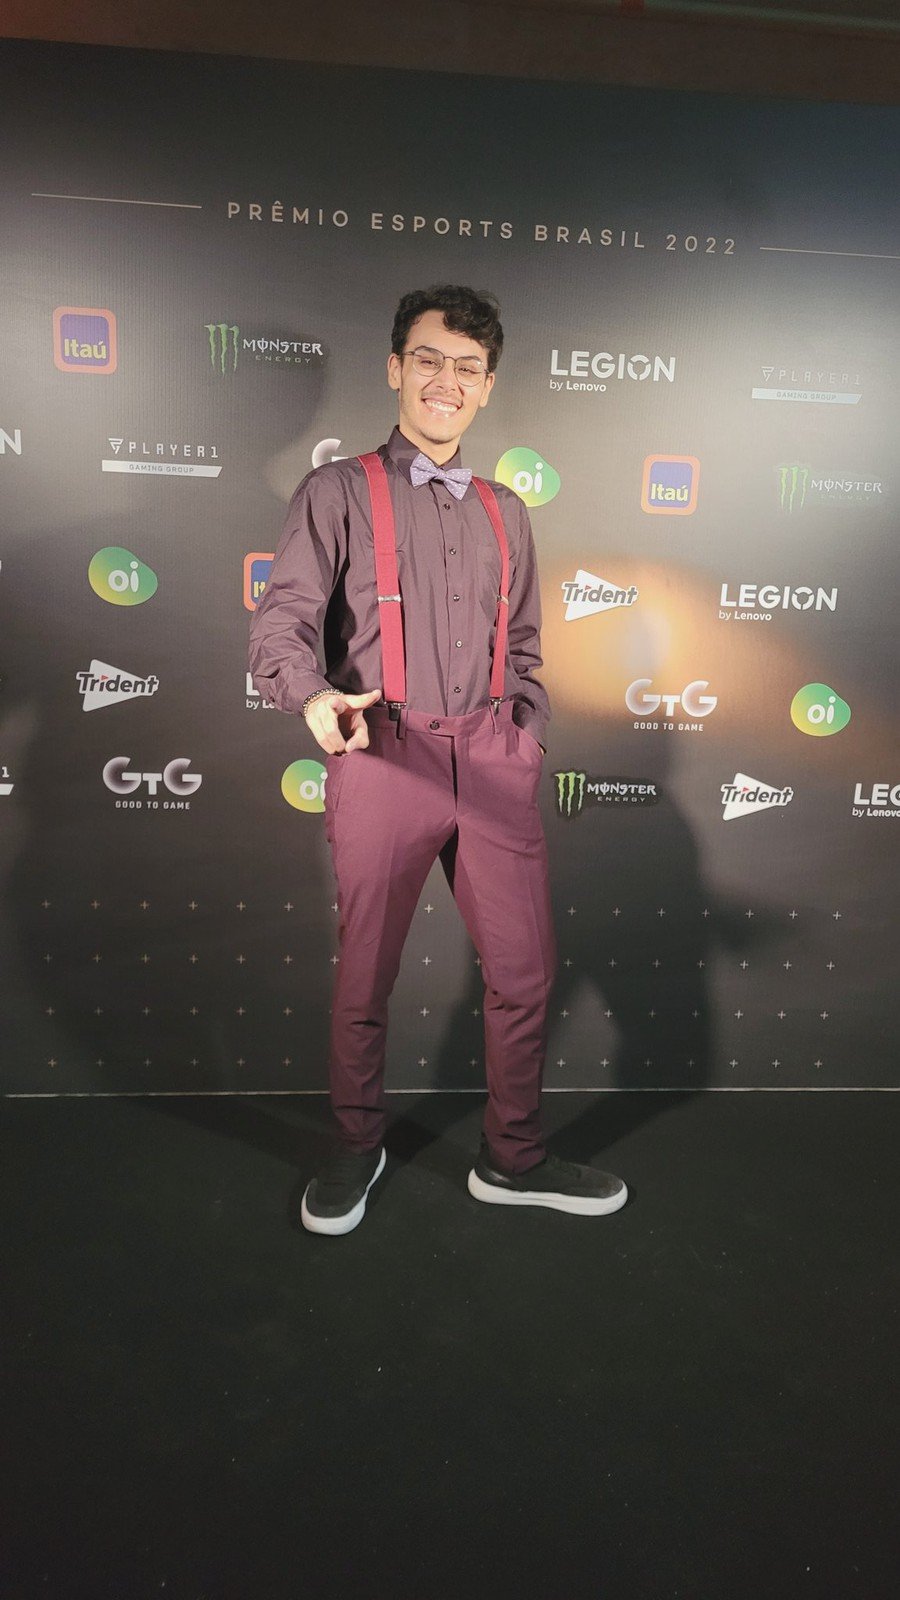 Me at Brazil's Esport Awards in 2022 representing Runeterra for the second time.